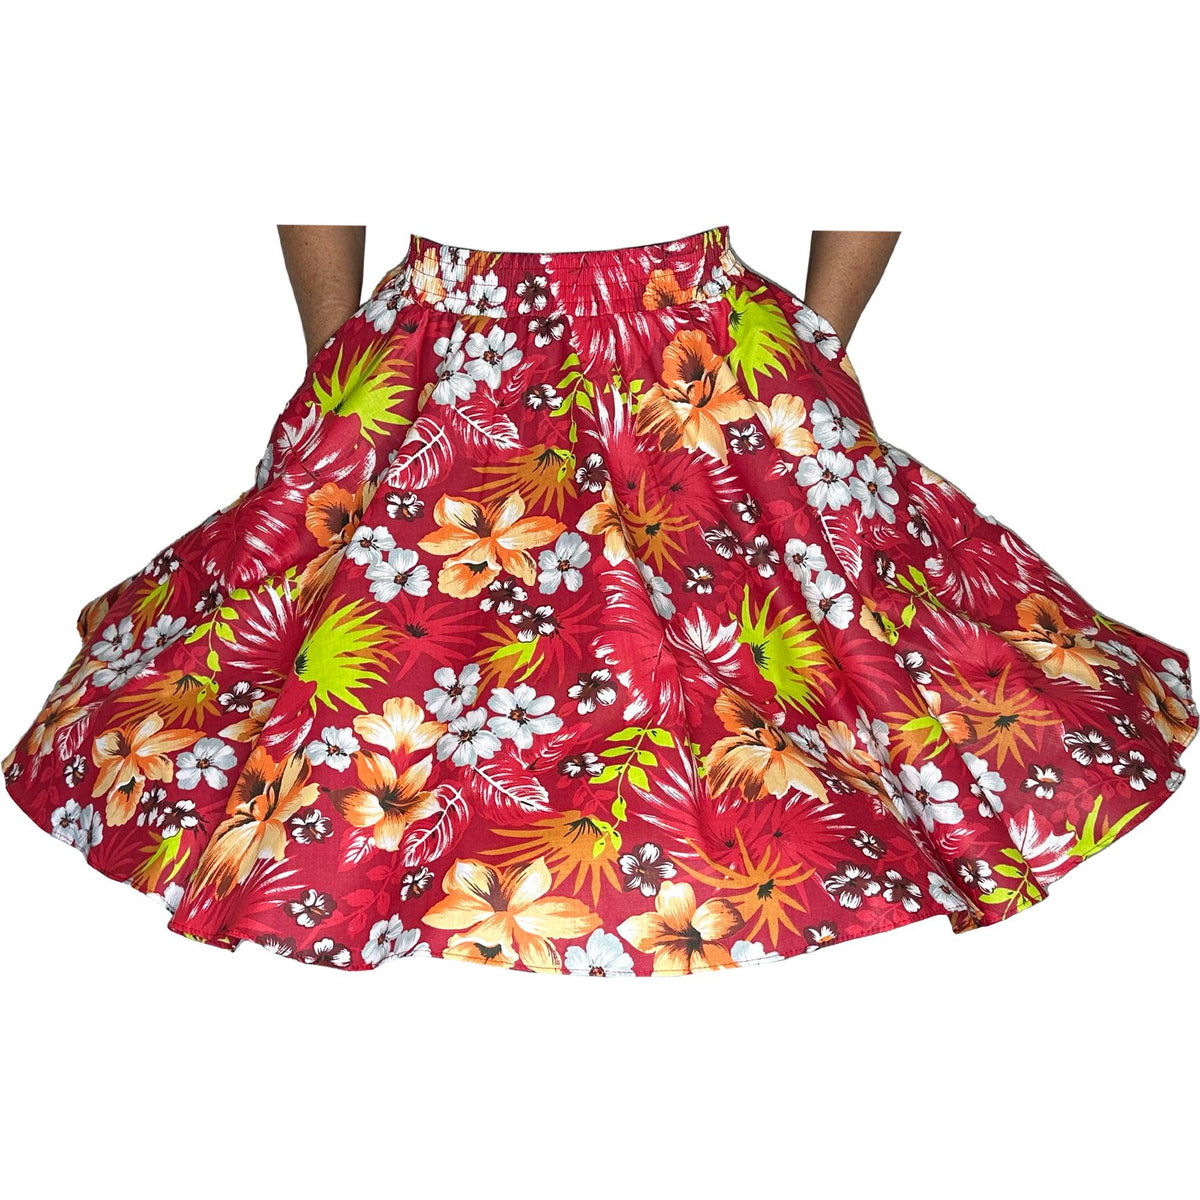 A woman wearing a red Floral Tropical Hawaiian Square Dance Skirt with a hibiscus flower print from Square Up Fashions.